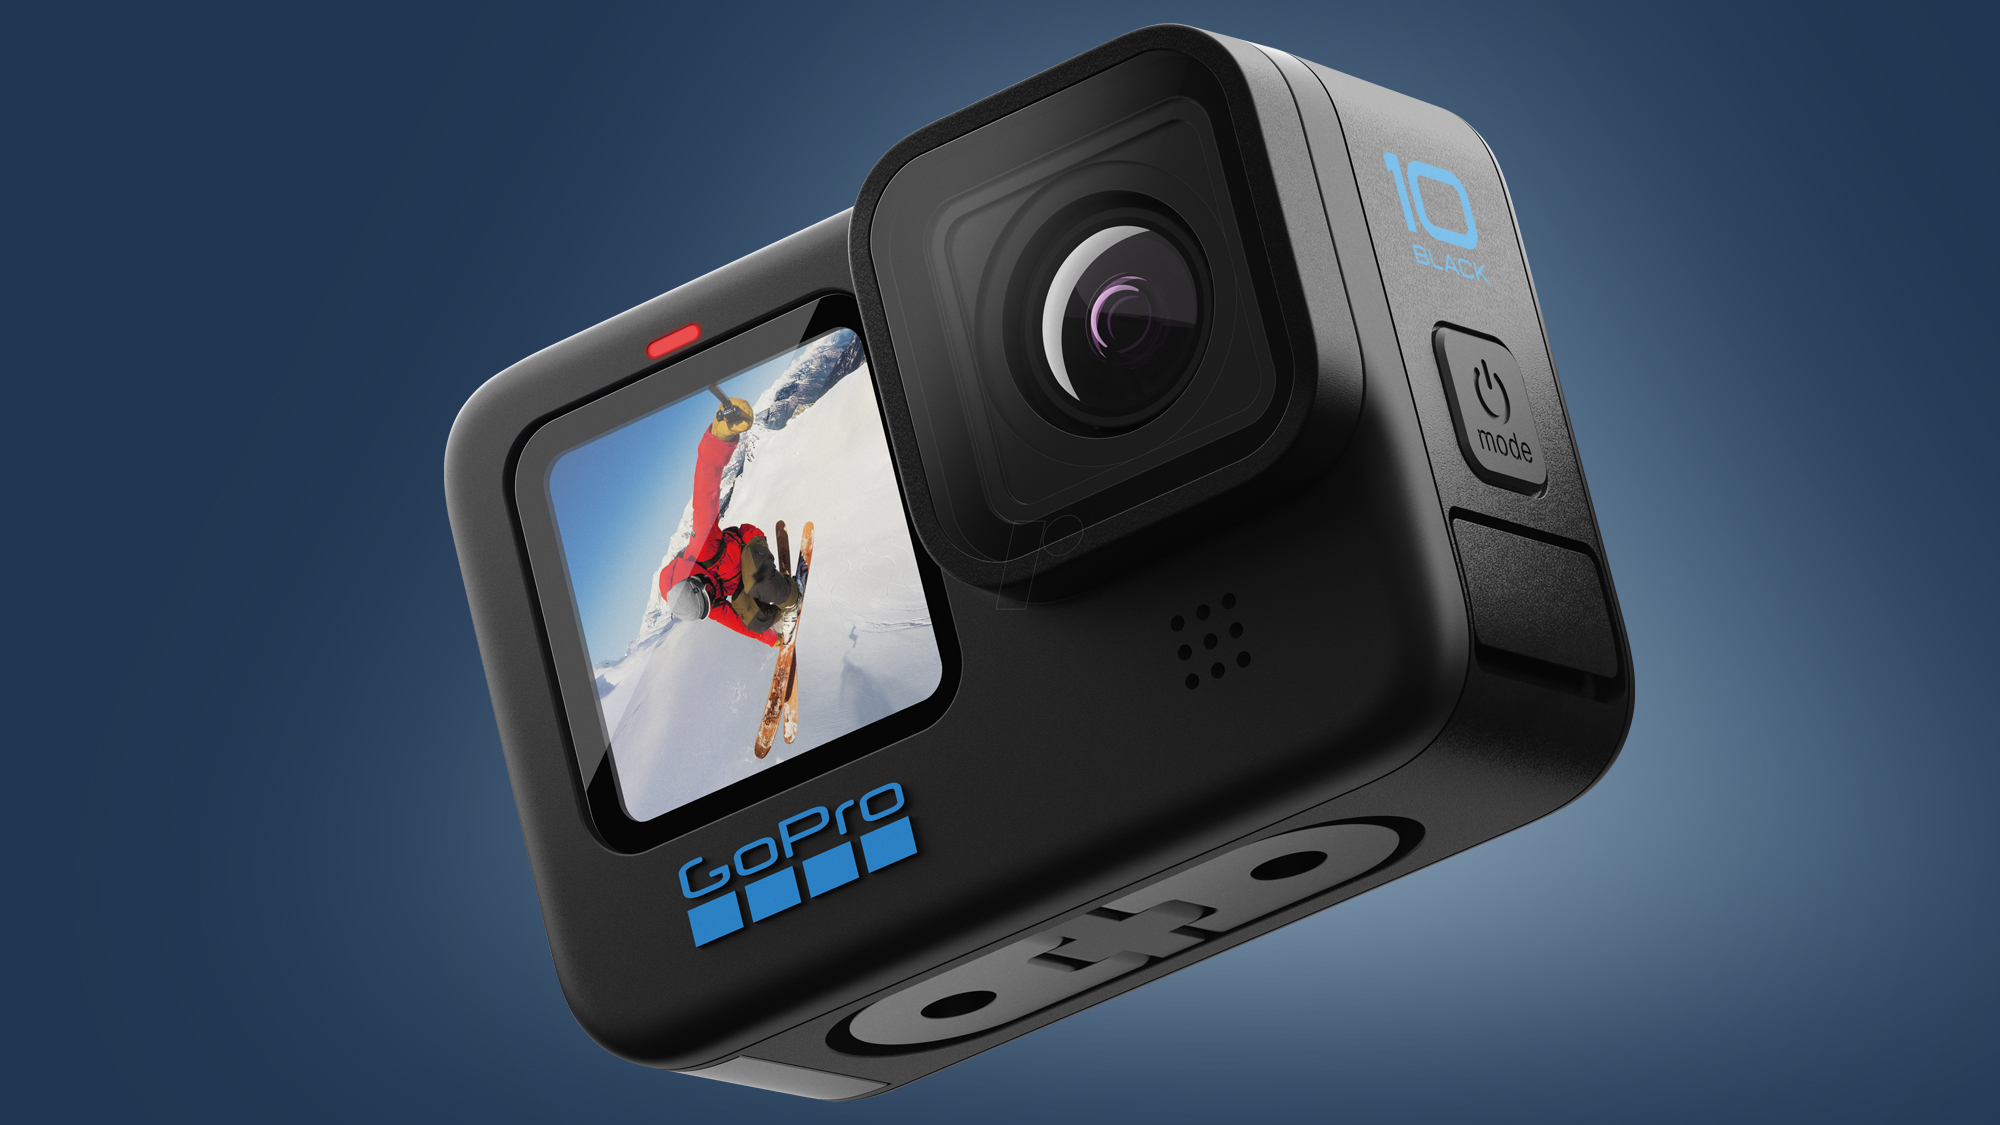 Should you buy a GoPro during Amazon Prime Day?